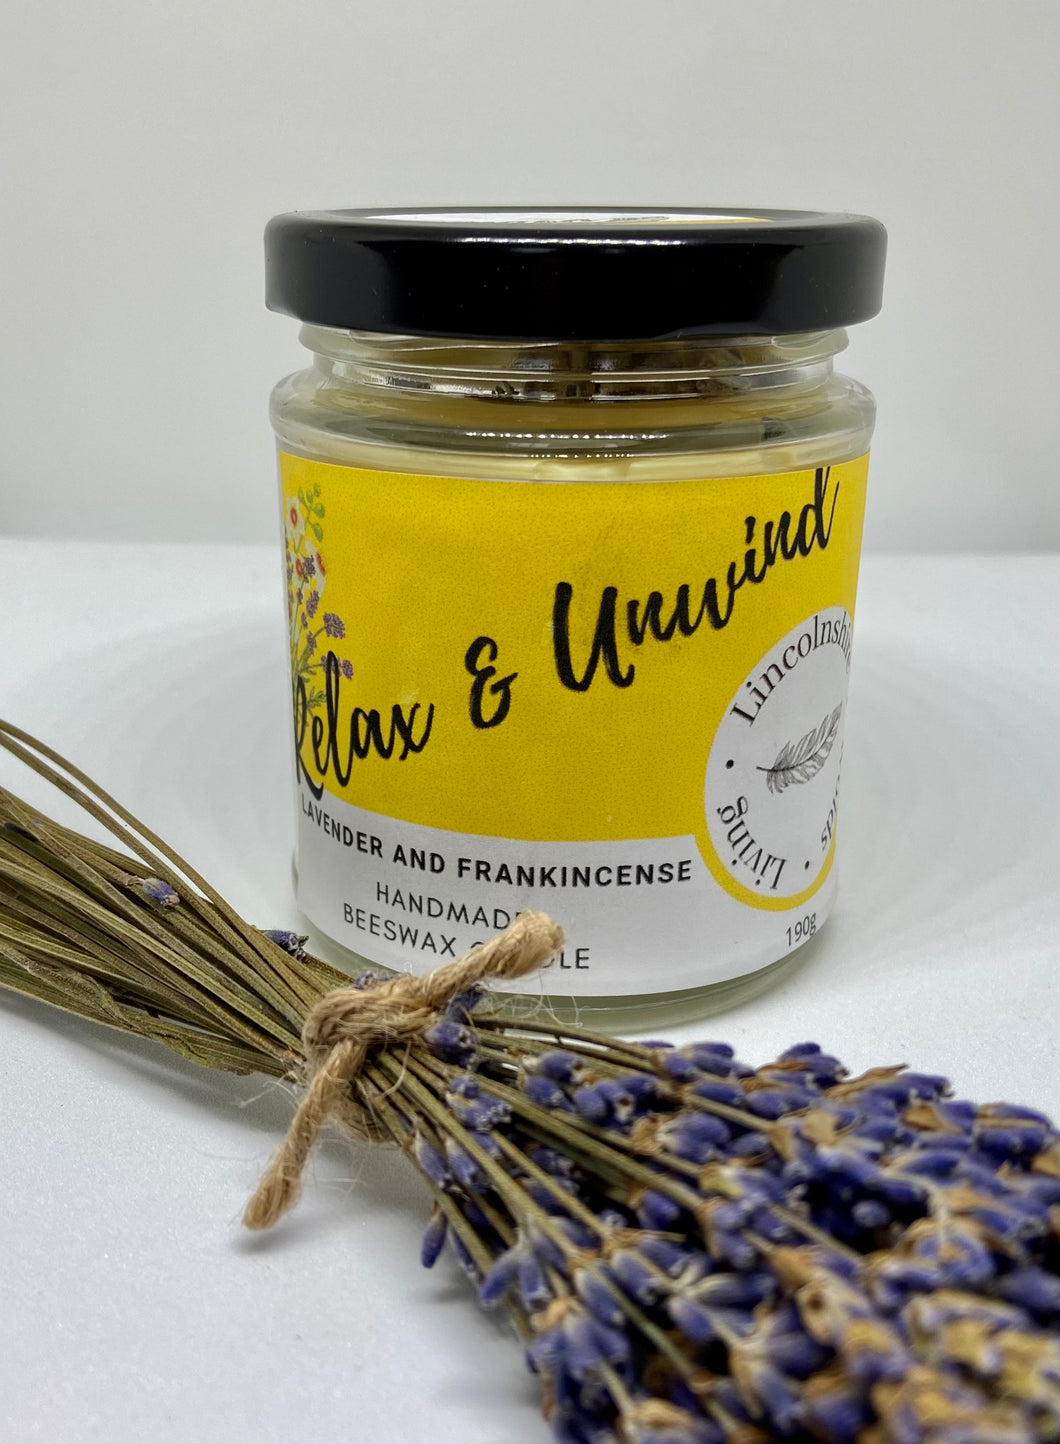 Relax & Unwind - Lavender and Frankincense